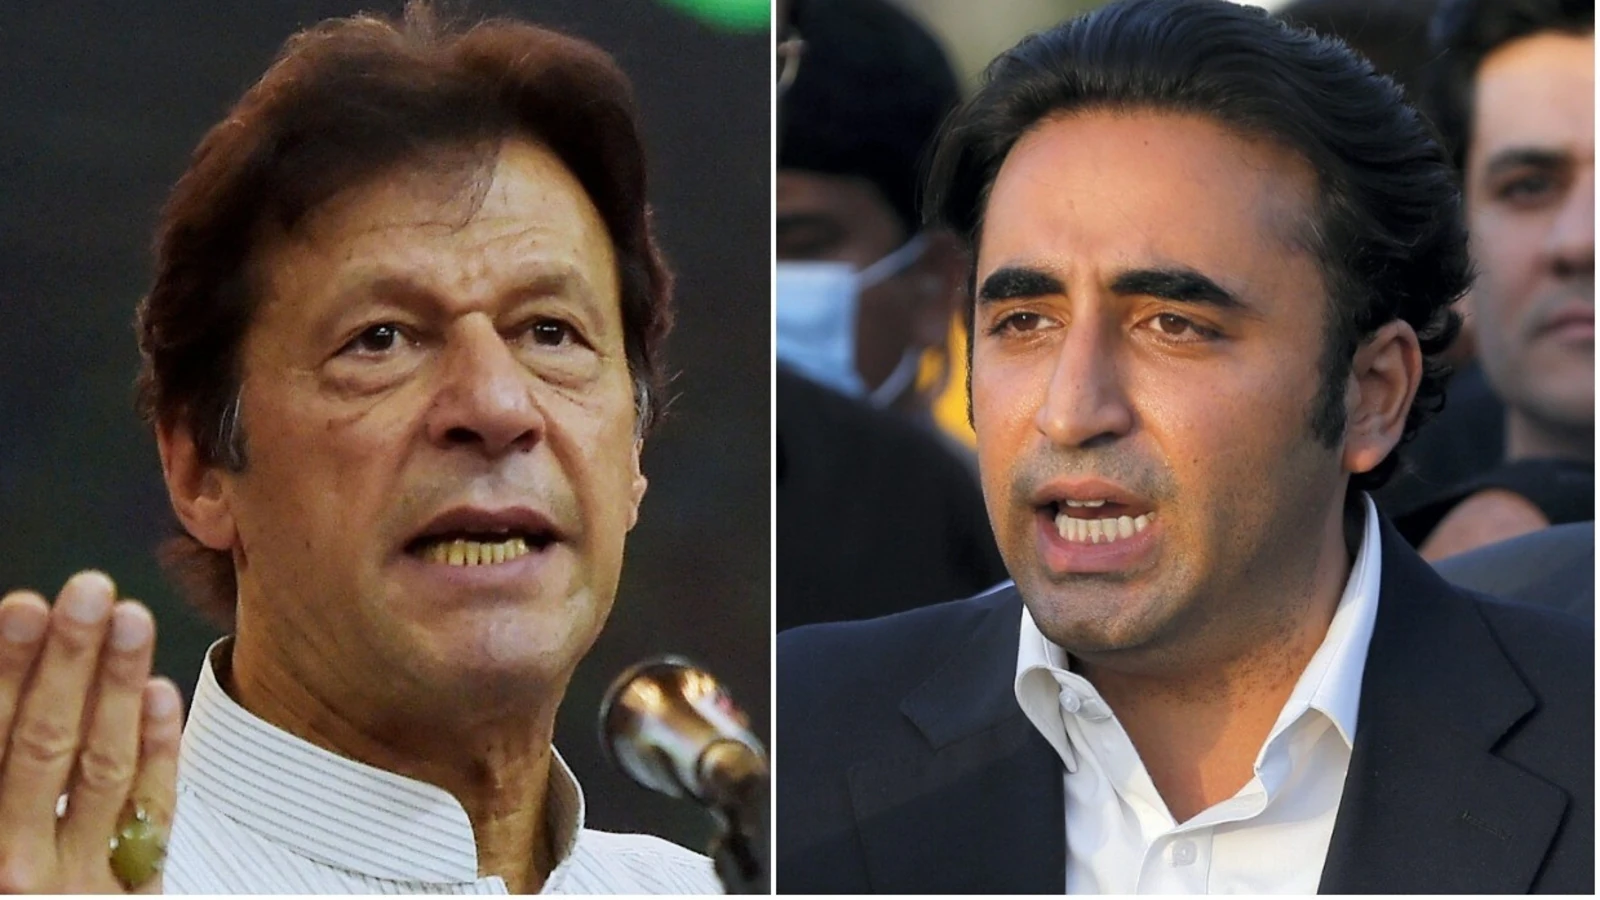 Not loyal to Pakistan: Imran Khan chides Bilawal Bhutto over his ‘martial law’ remark